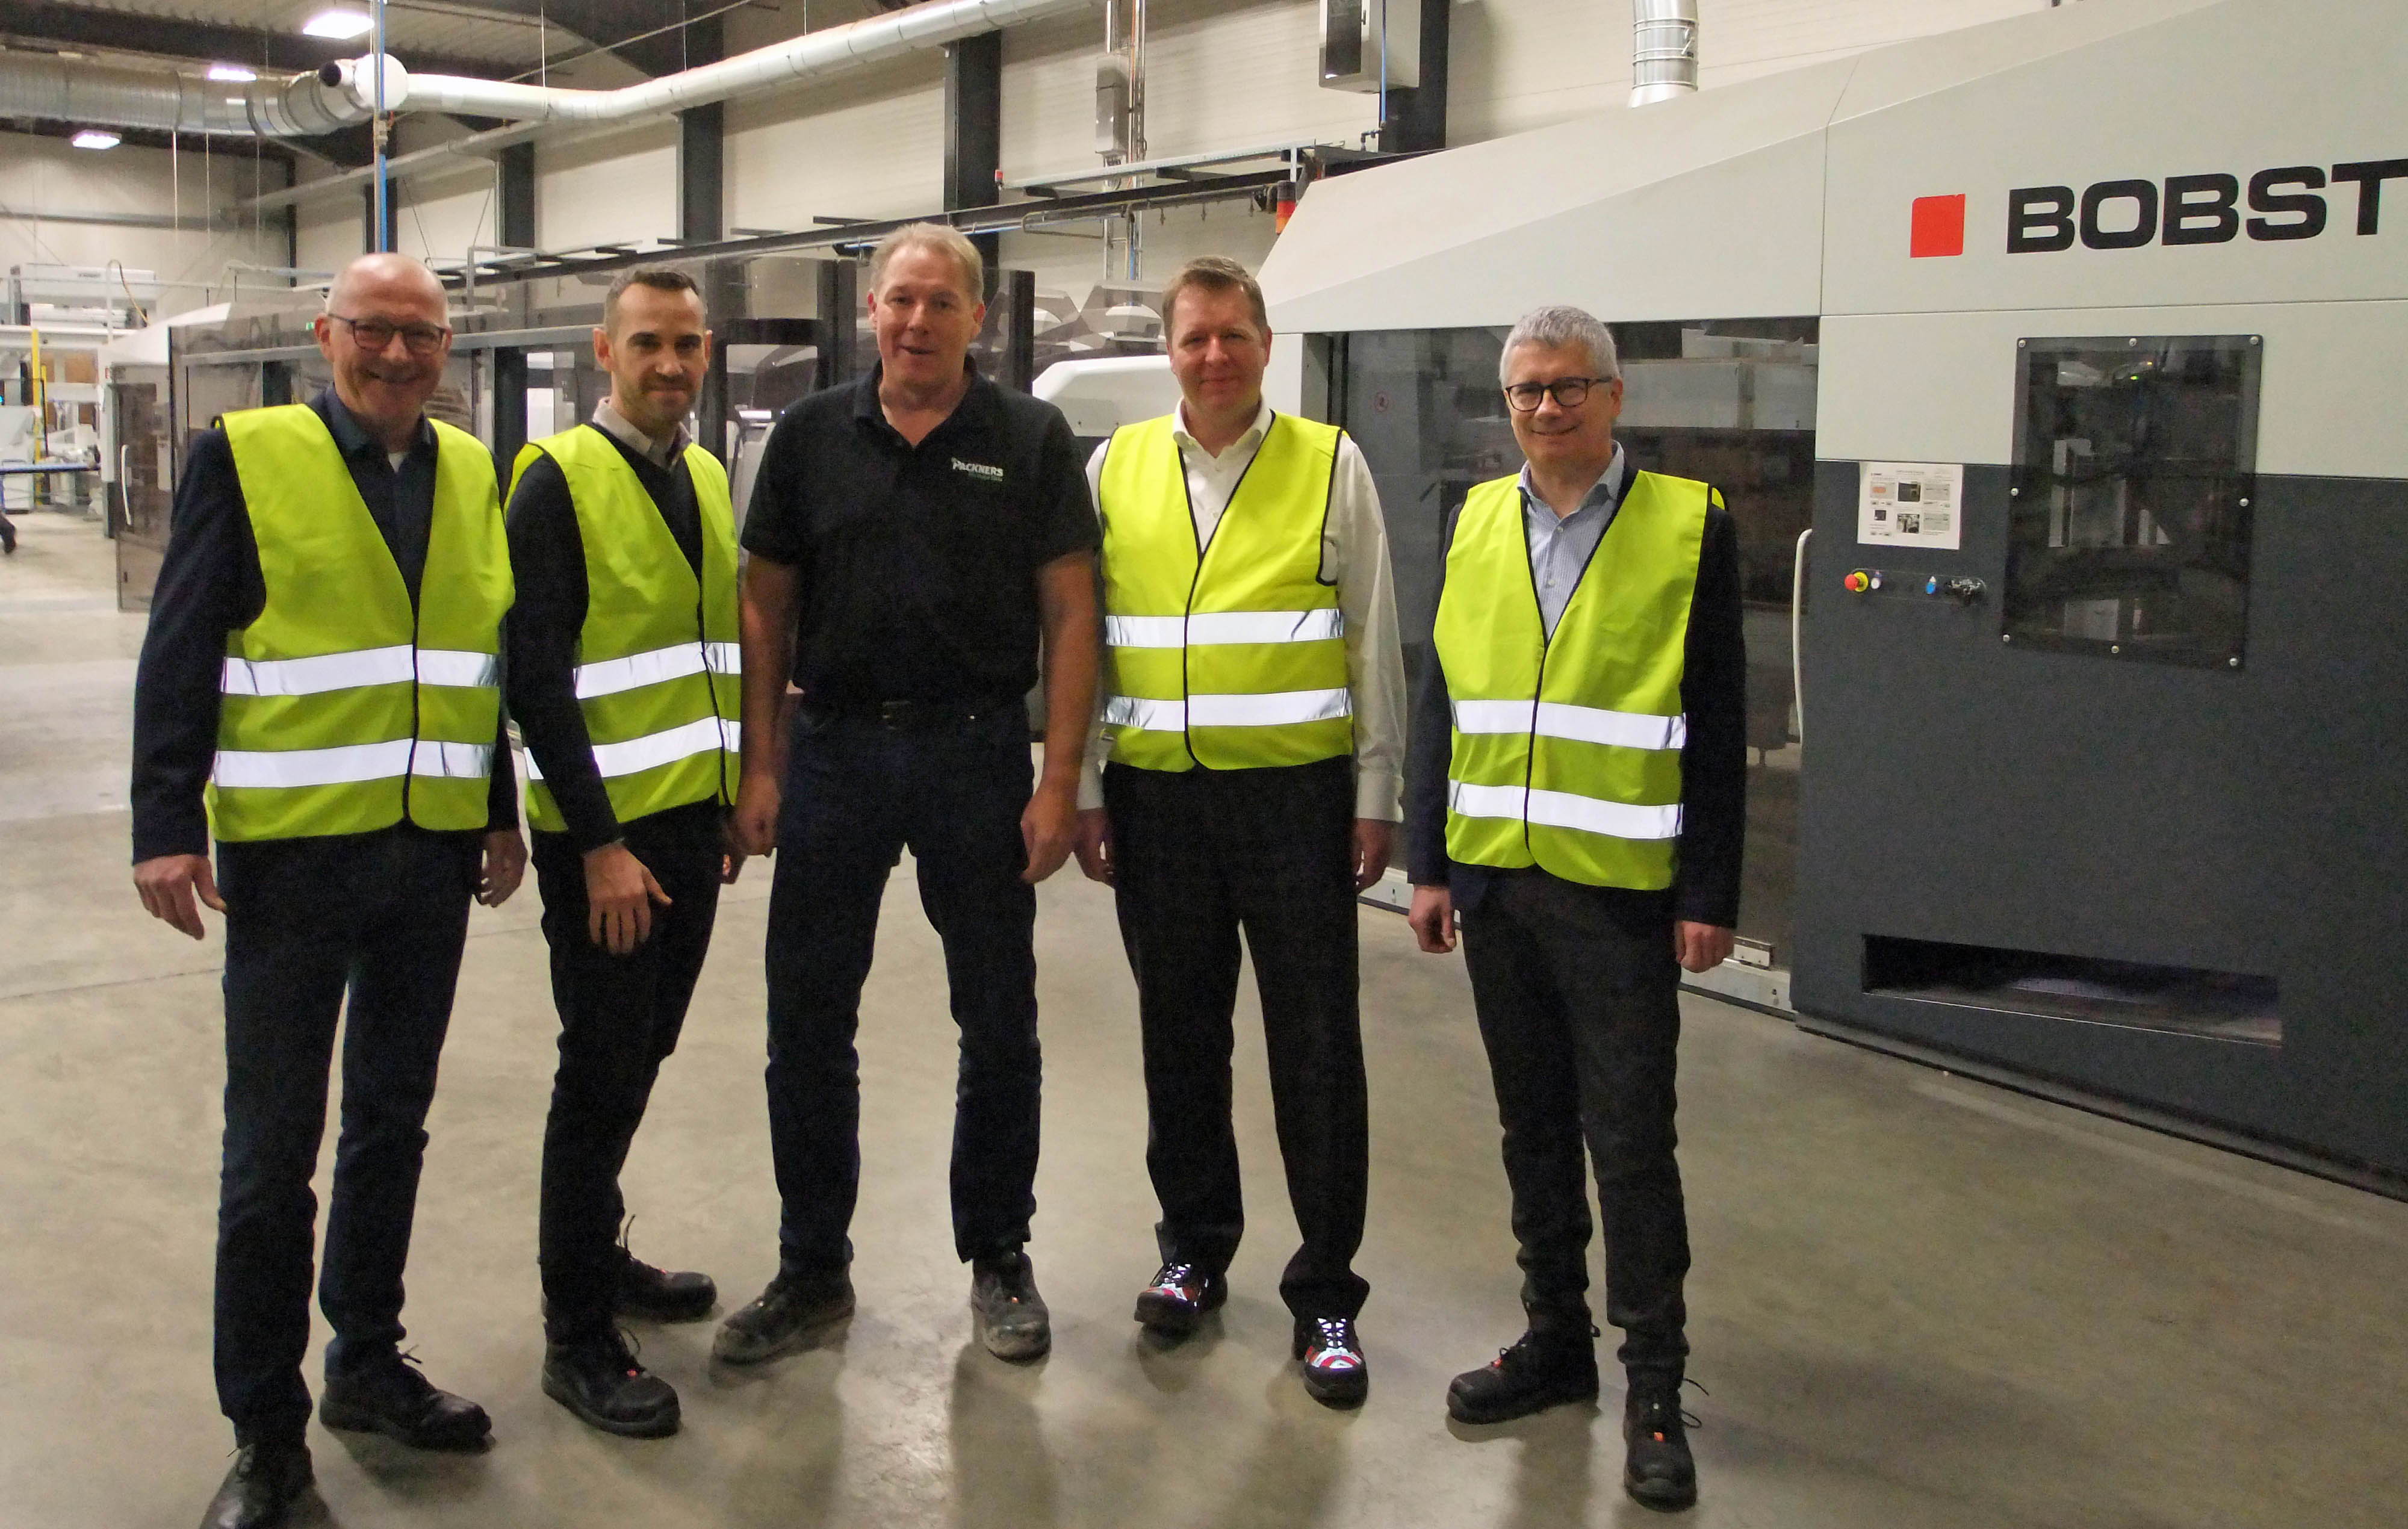 Stefan Gausepohl (second from right) and Christian Wala (left of him) with Olivier Portal, at Bobst Lyon Technology Sales Manager for Germany and Switzerland (second from left), Norbert Klein, Sales Bobst Meerbusch (first from left), and Tomasz Nieborek, at Bobst Mex Regional Marketing & Communications Manager for DACH (far right).